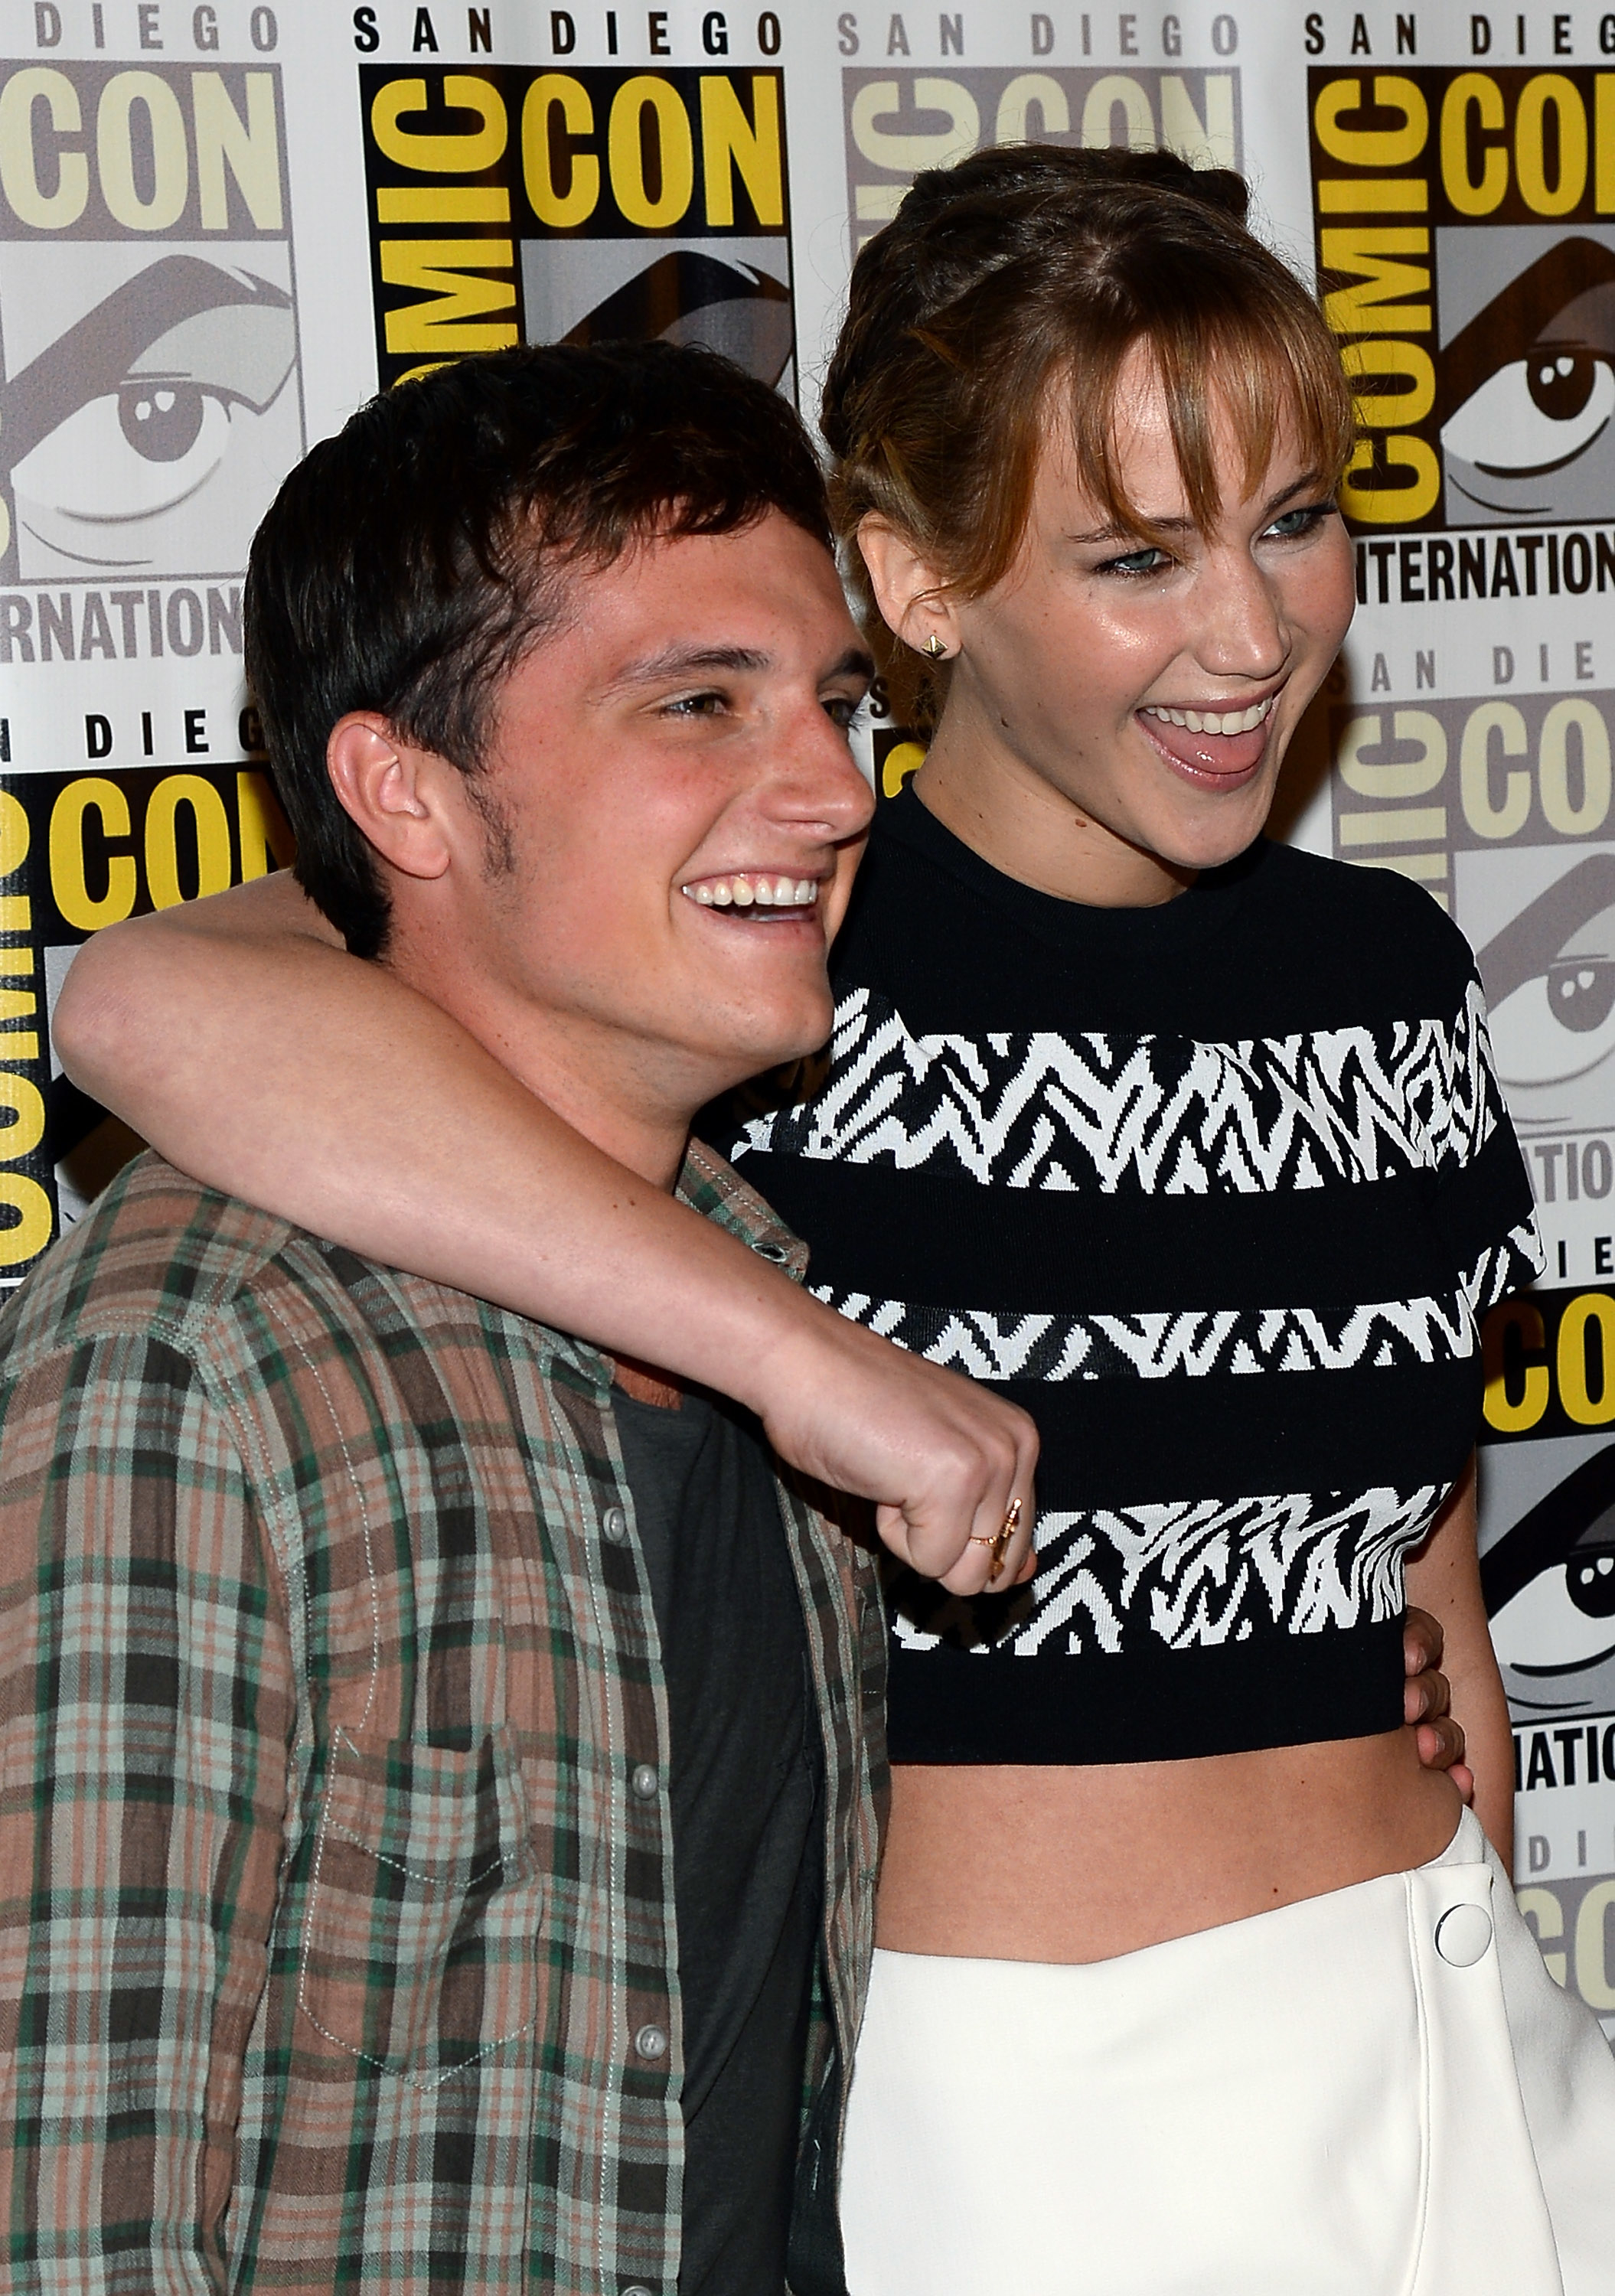 Jennifer smiles widely as she has her arm around Josh&#x27;s shoulders on the red carpet